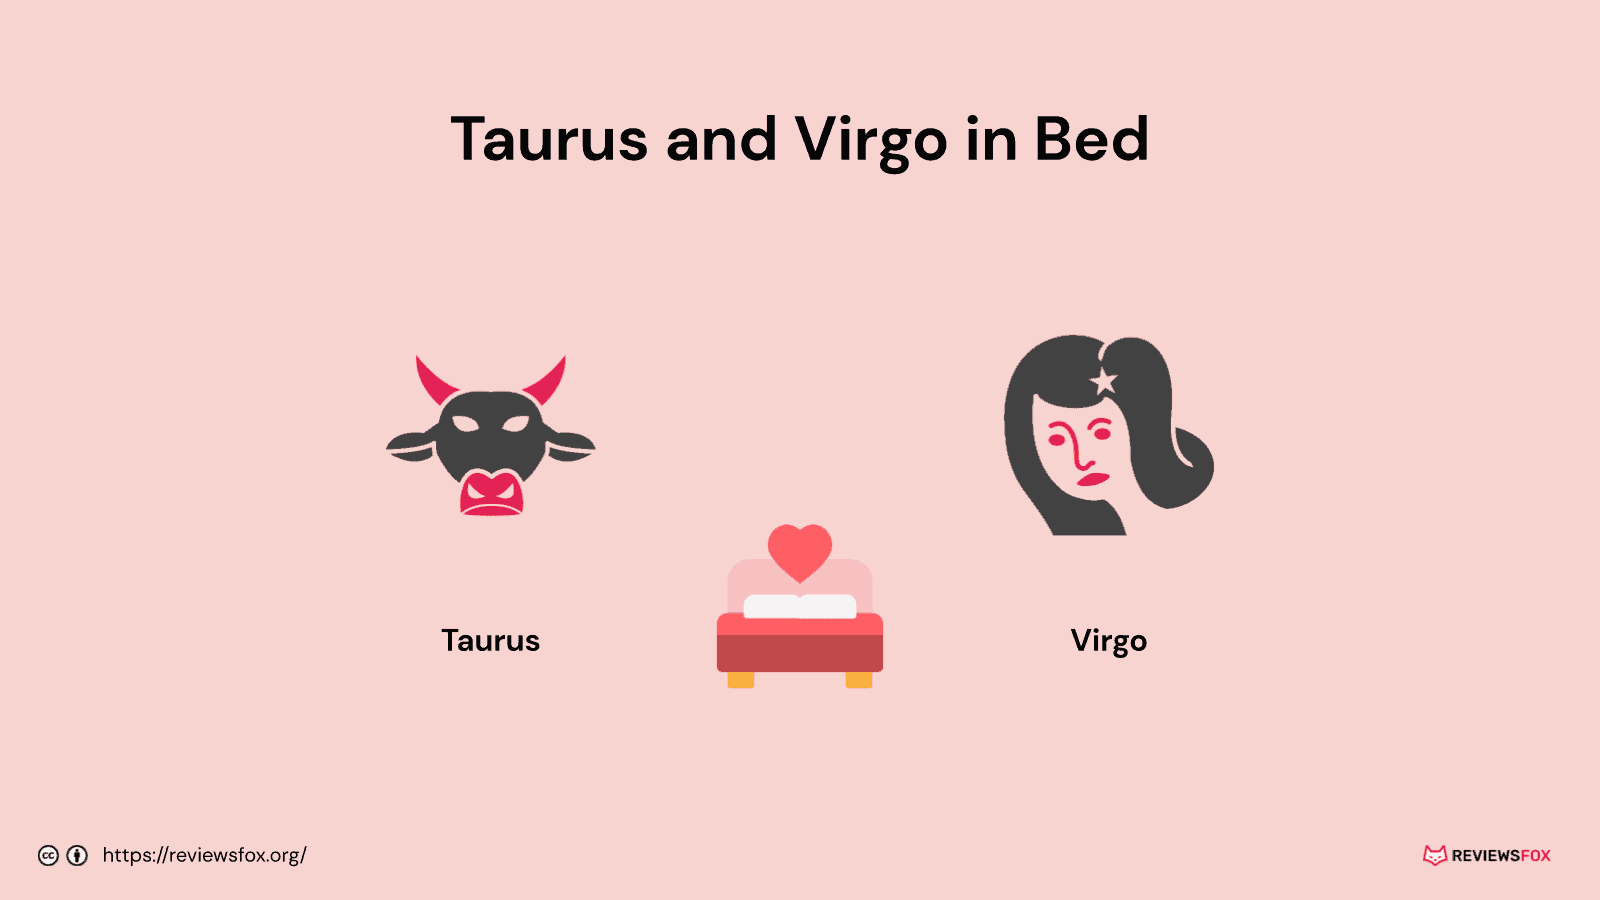 Taurus and Virgo in bed